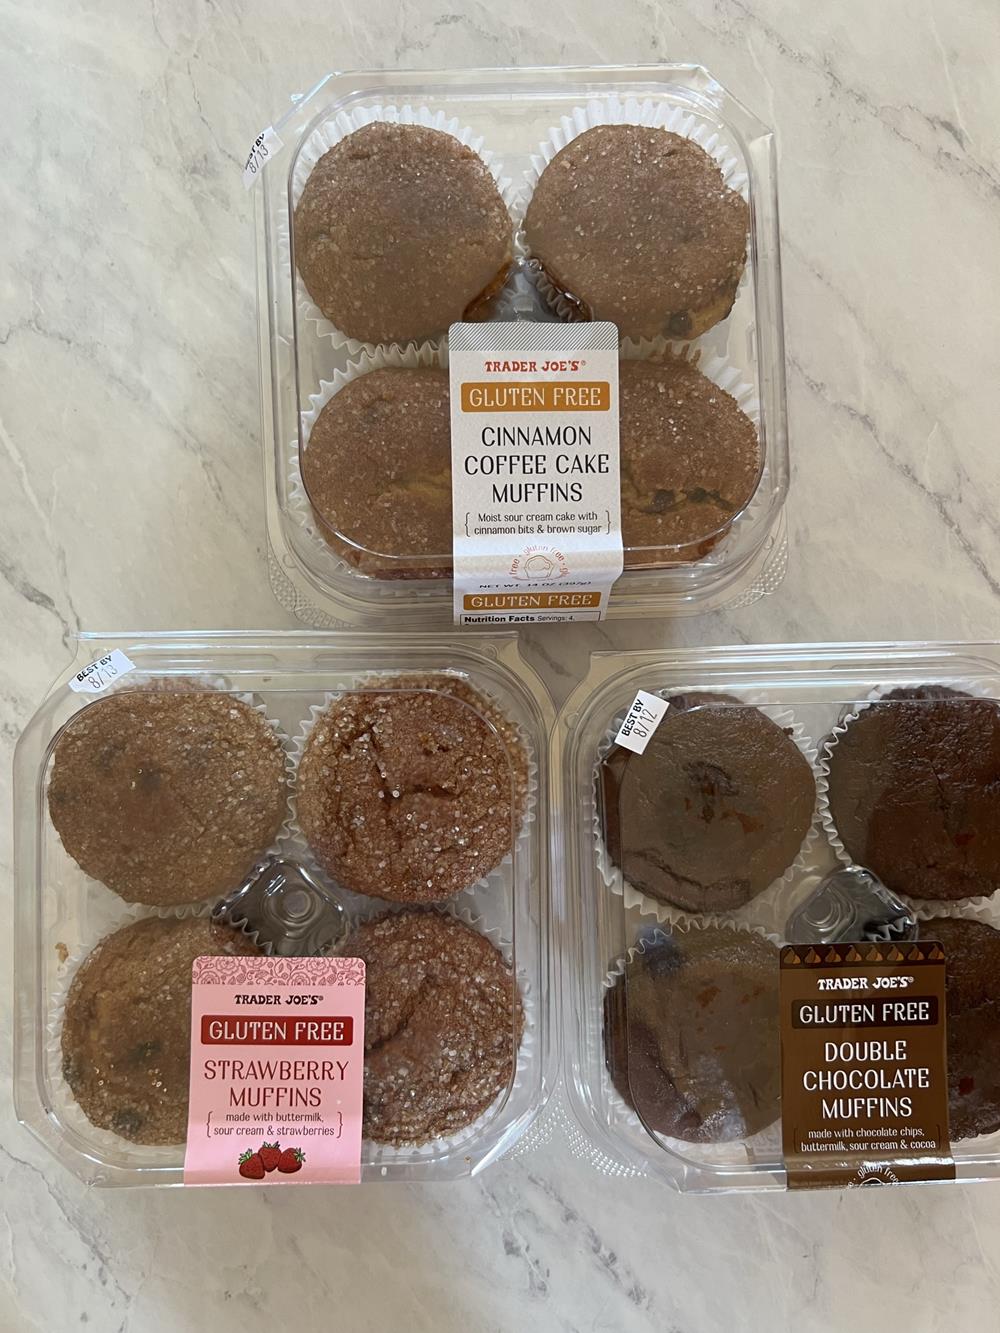 Trader Joe's GF Muffins in packages